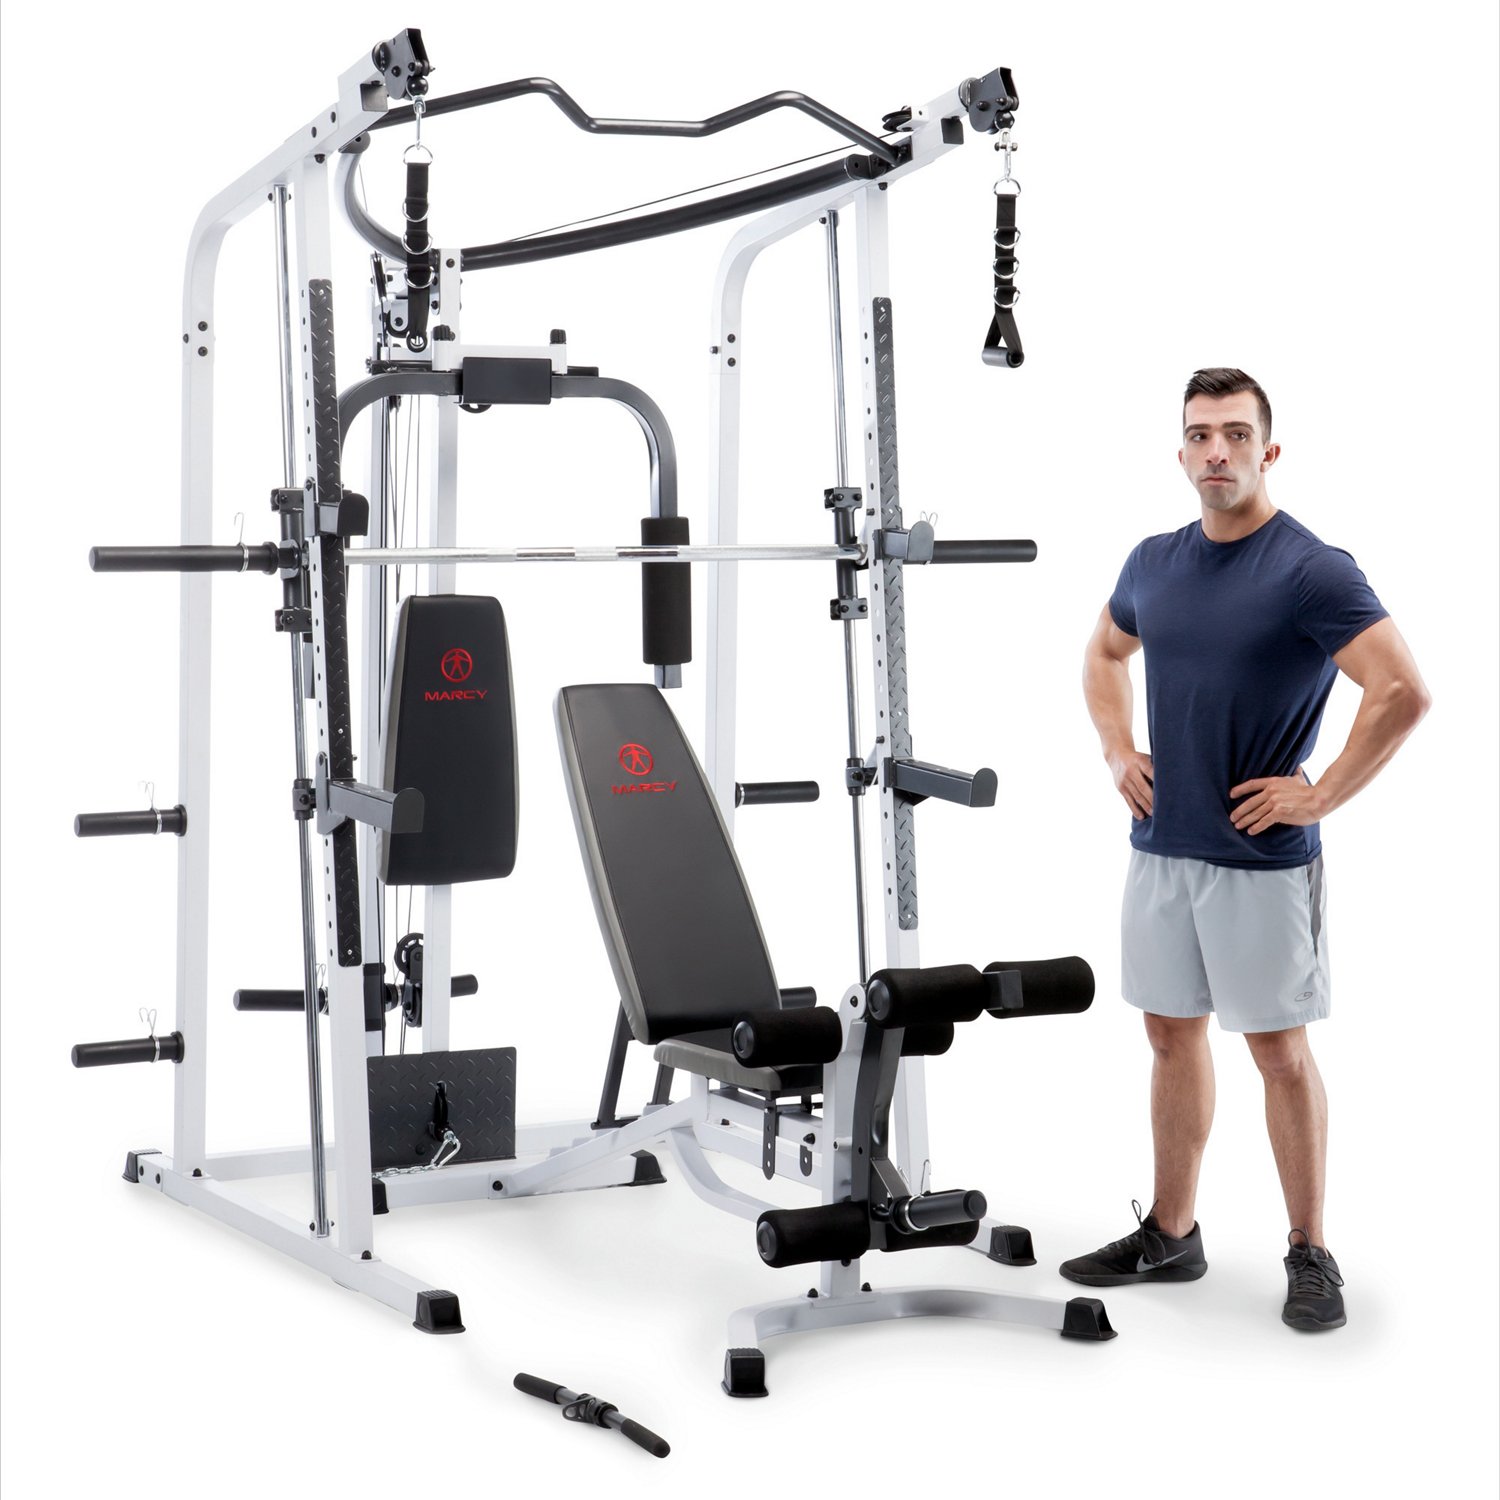 stores that sell exercise equipment near me